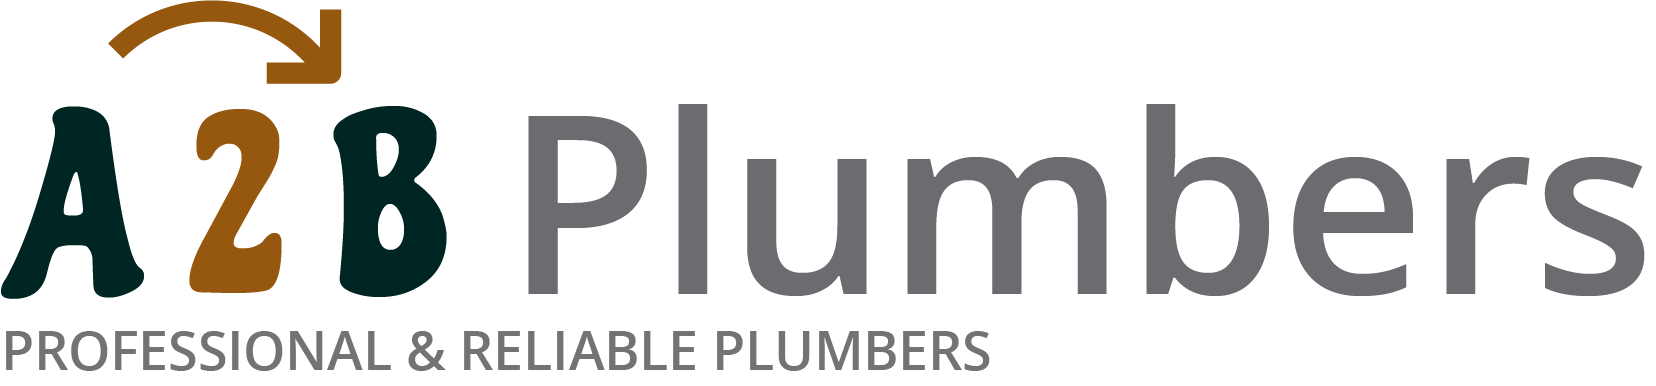 If you need a boiler installed, a radiator repaired or a leaking tap fixed, call us now - we provide services for properties in Padiham and the local area.